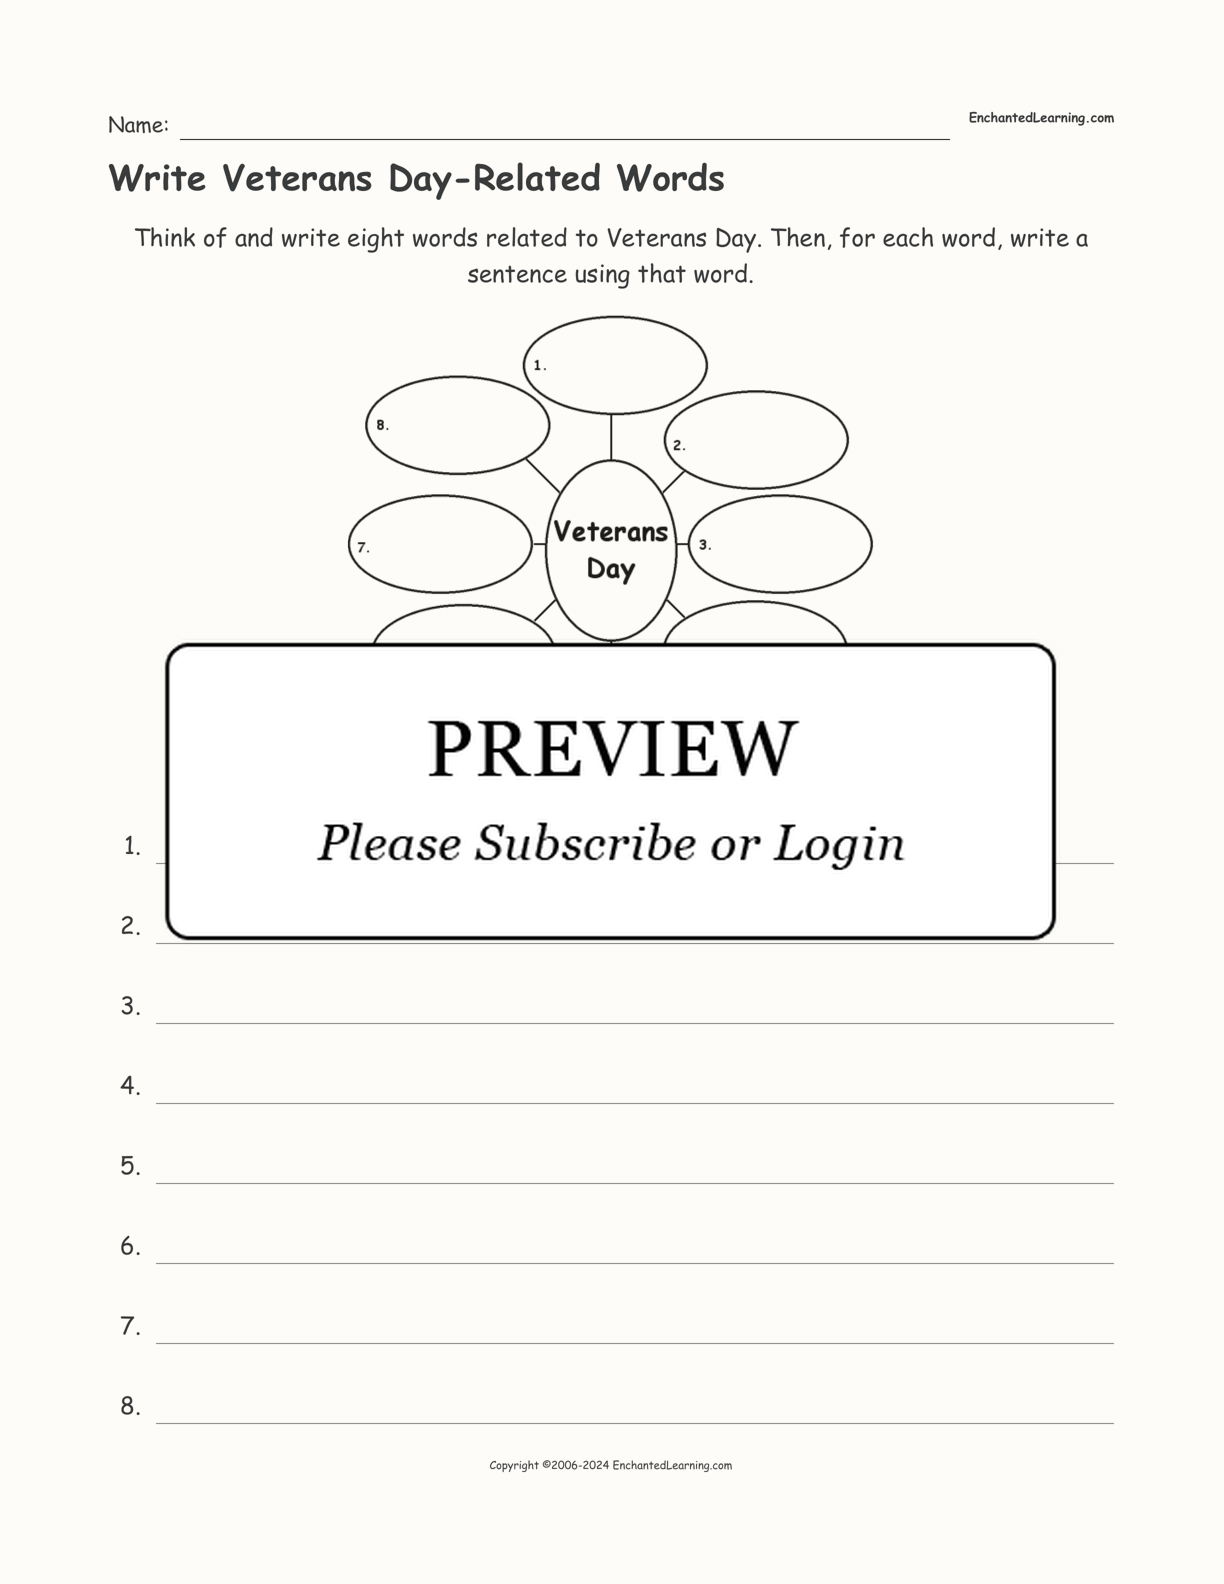 Write Veterans Day-Related Words interactive worksheet page 1